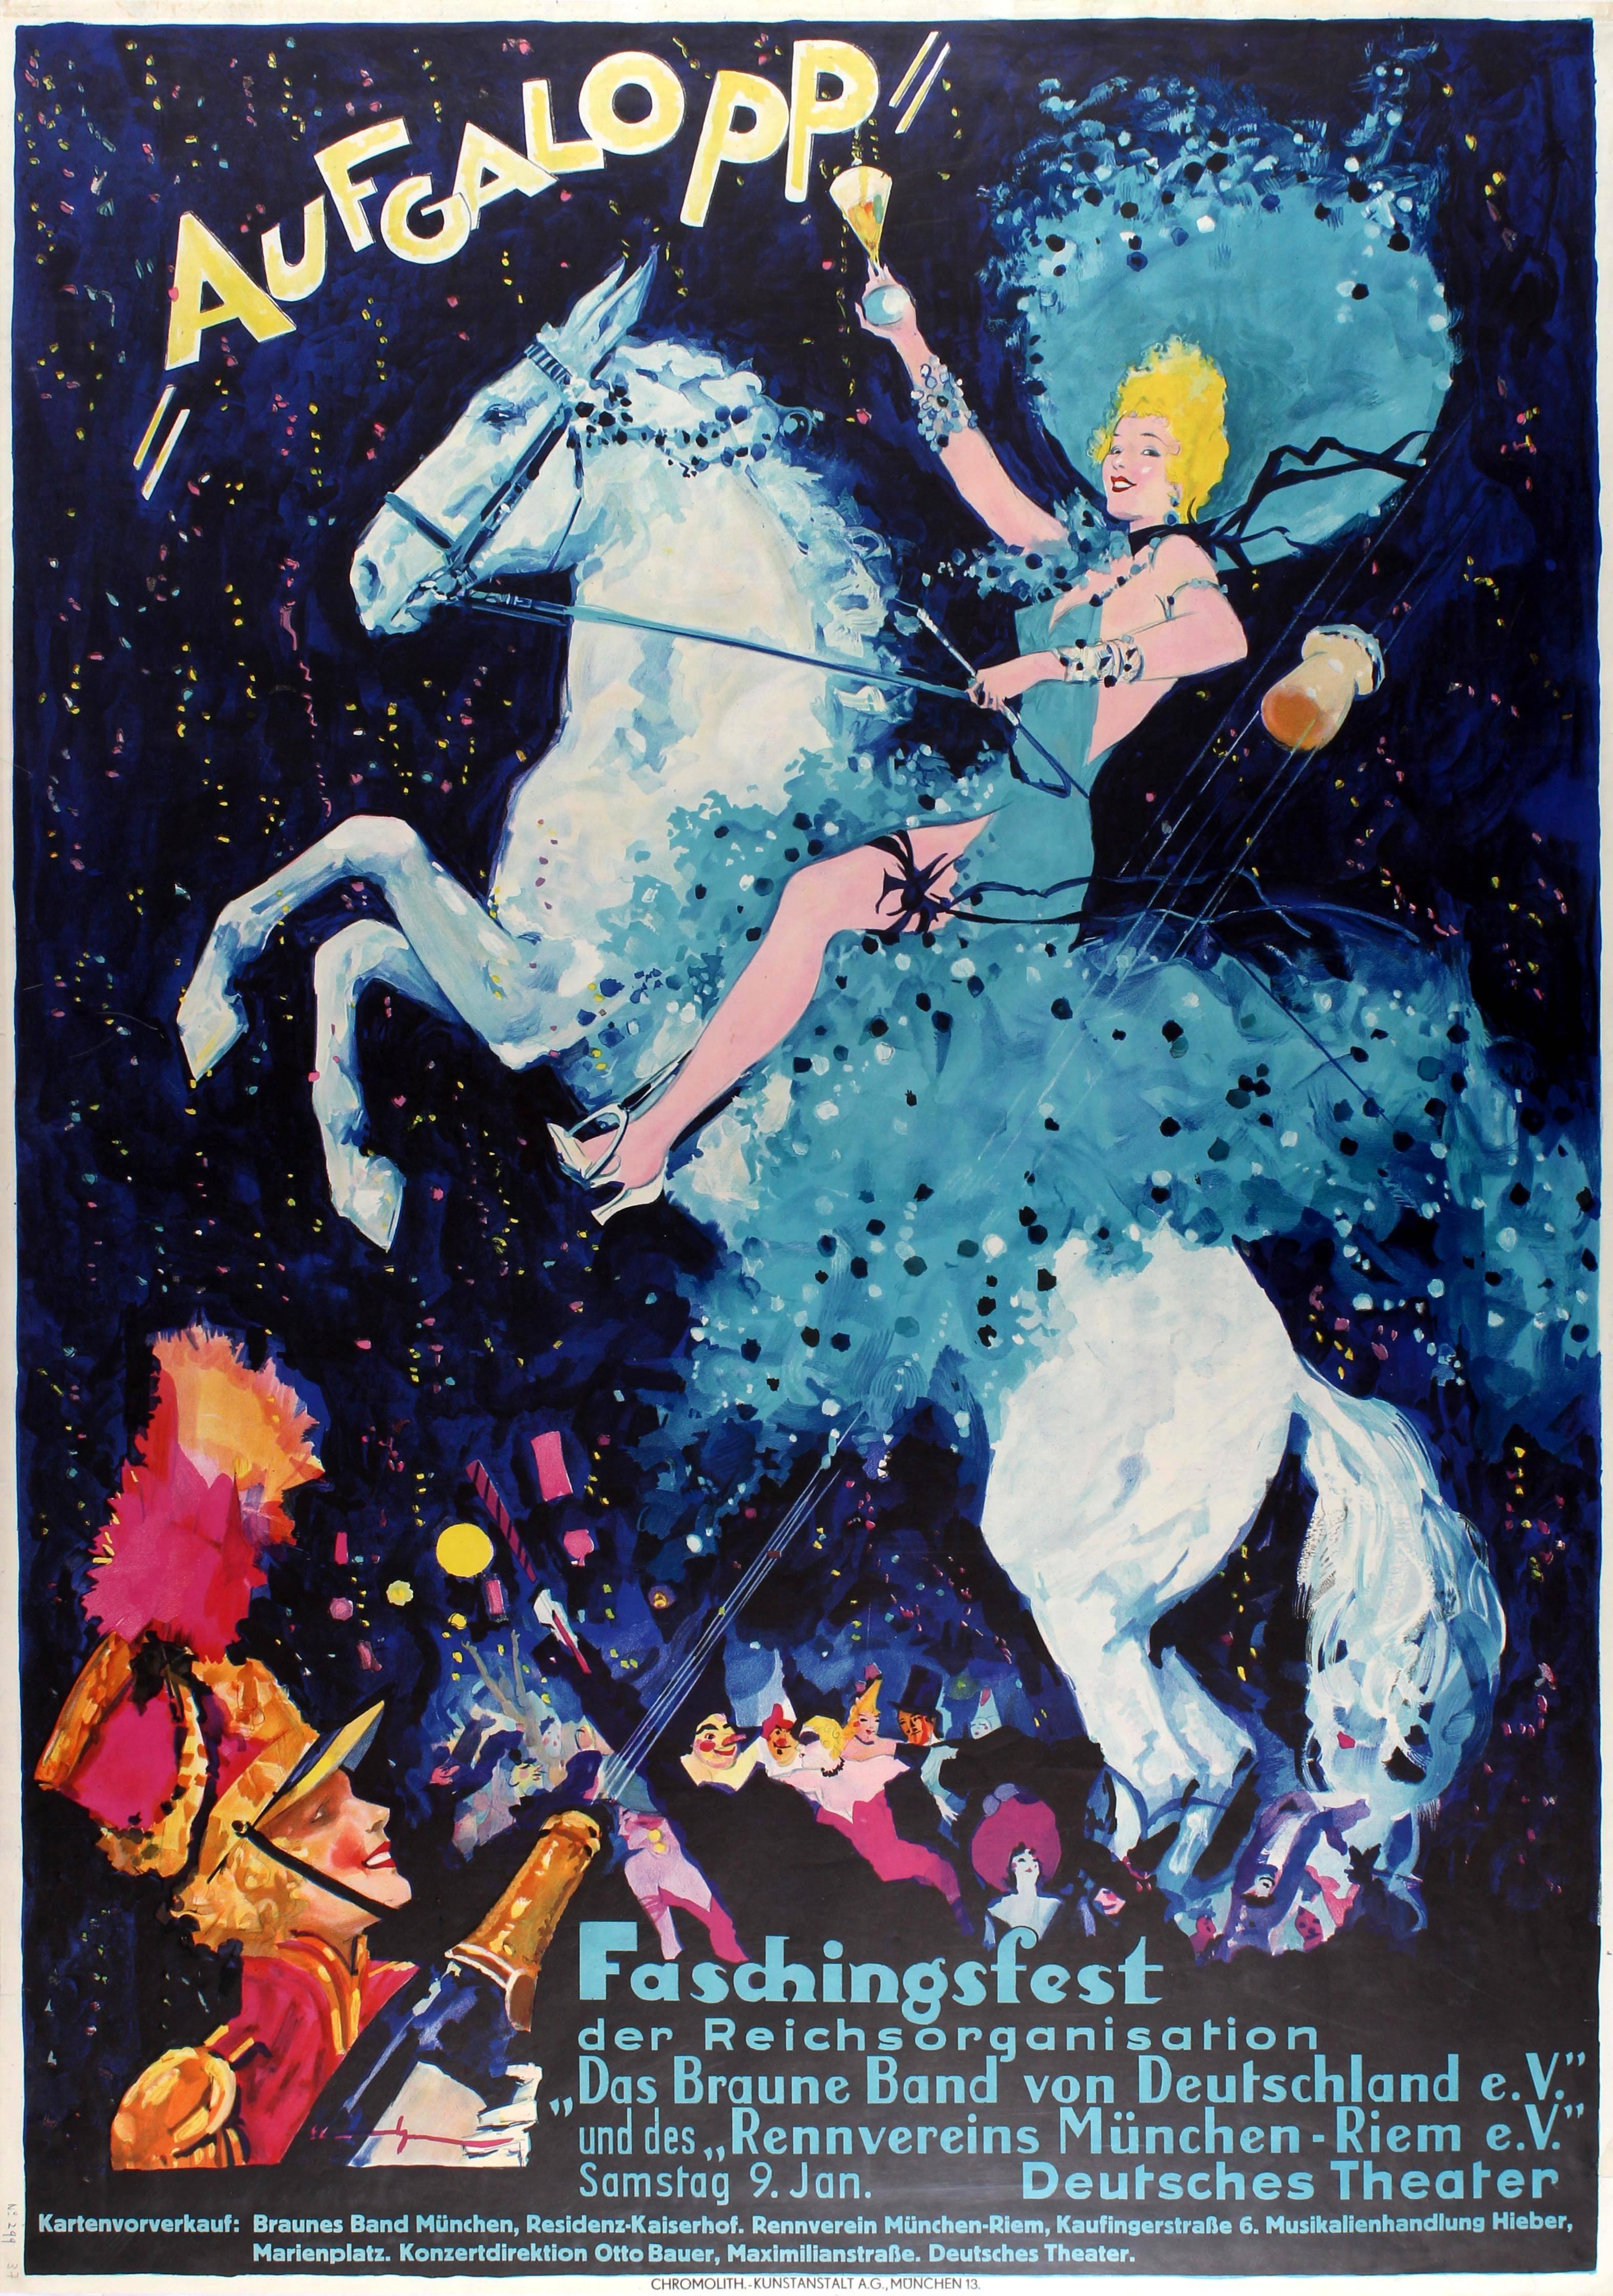 Ludwig Lutz Ehrenberger Print - Large Original Vintage Poster For The Aufgalopp Faschingsfest Carnival In Munich